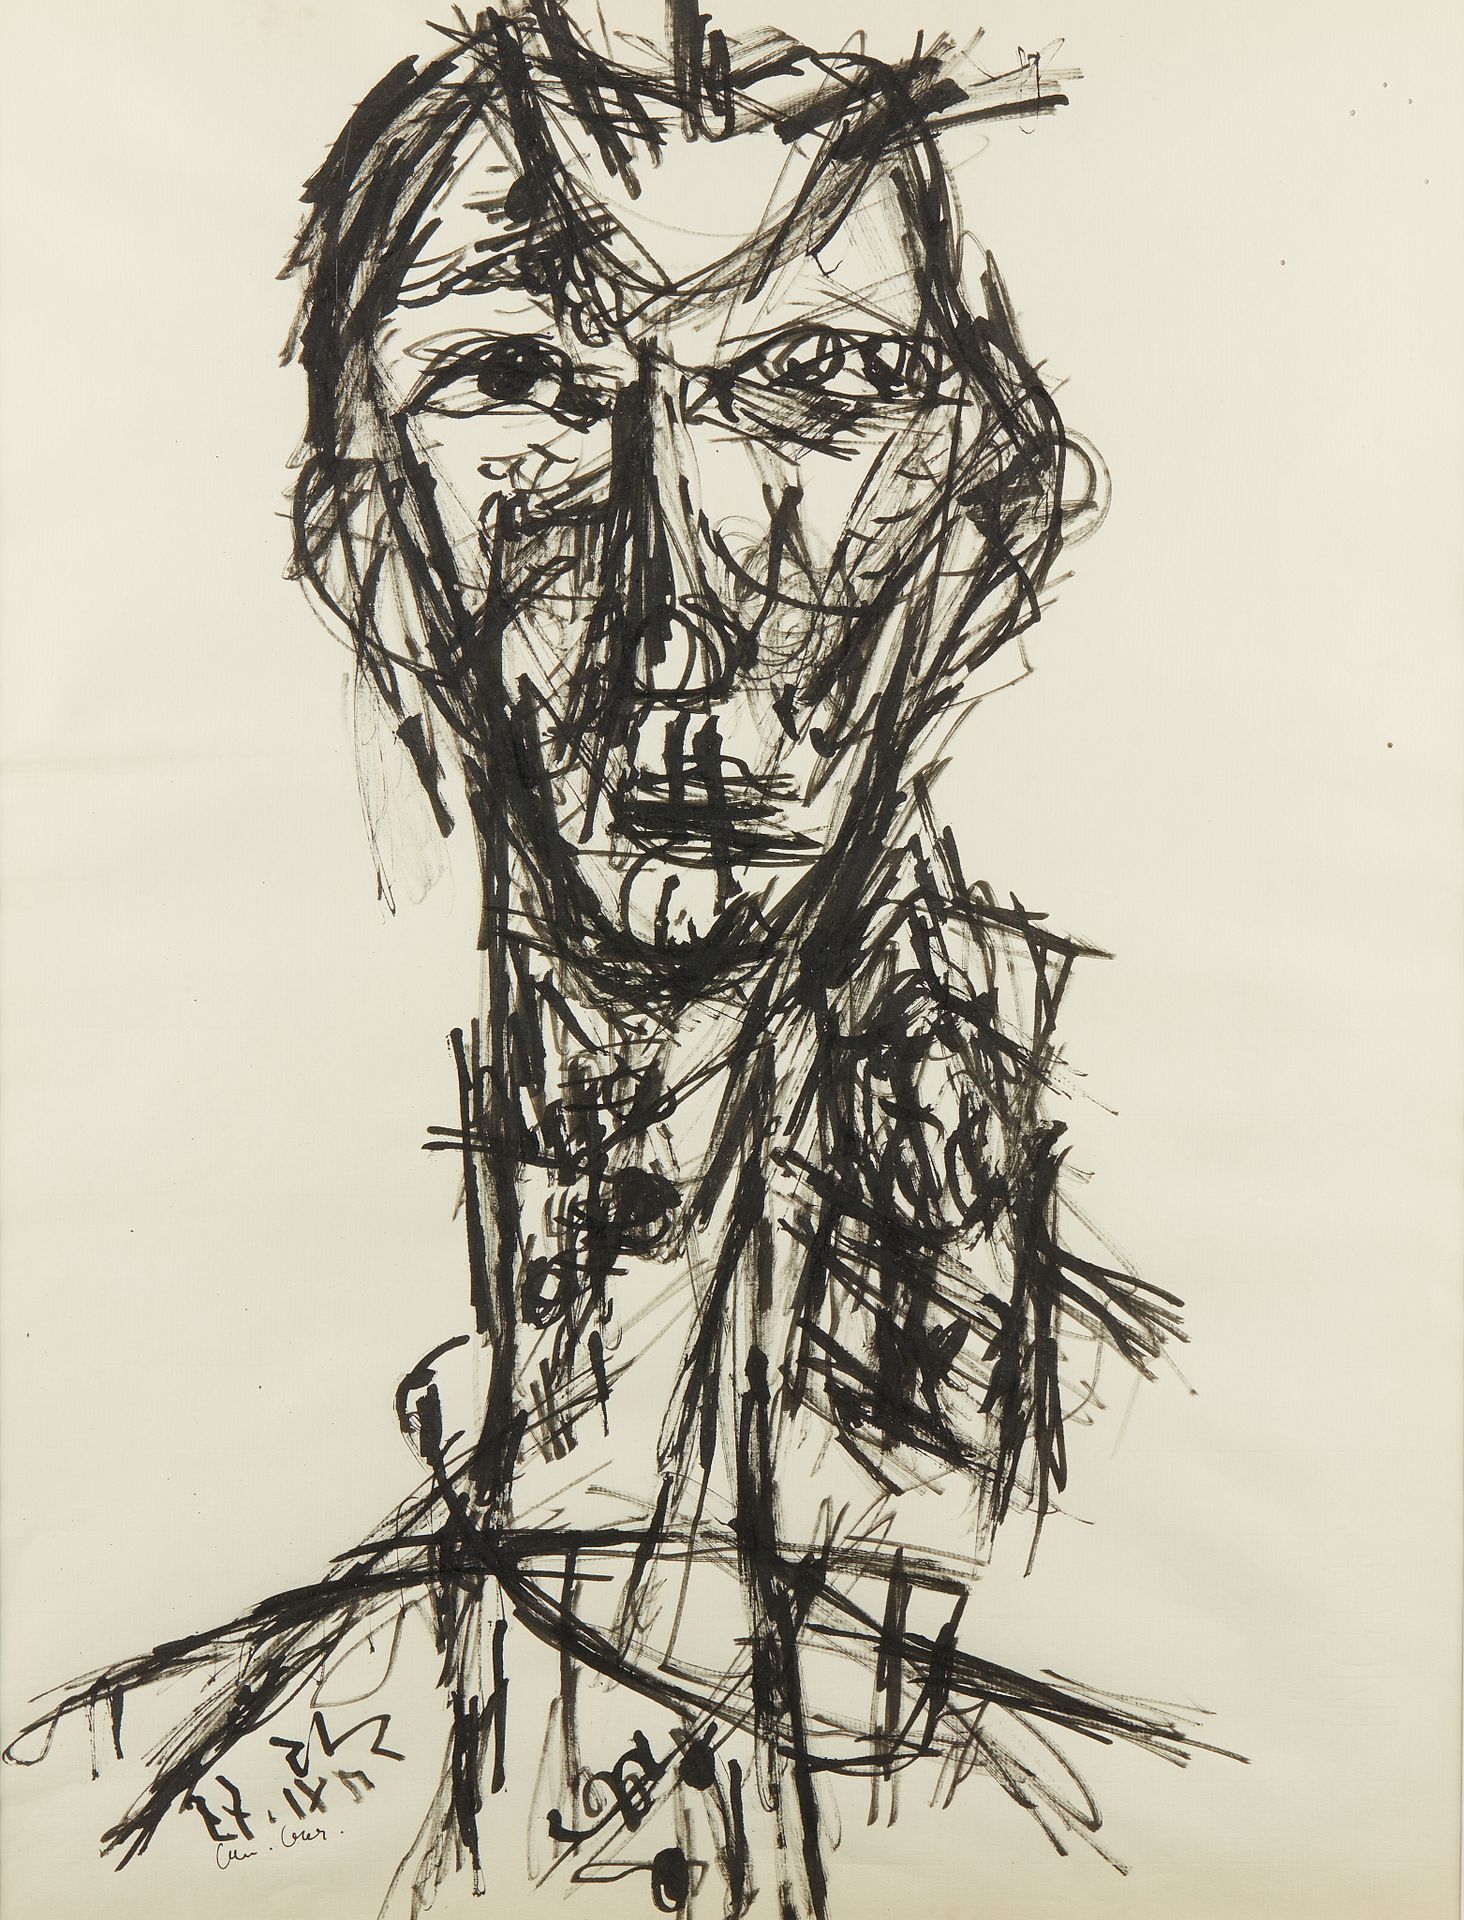 Null David LAN BAR (1912-1987)

Portrait of a man 

Ink on paper 

Signed and da&hellip;